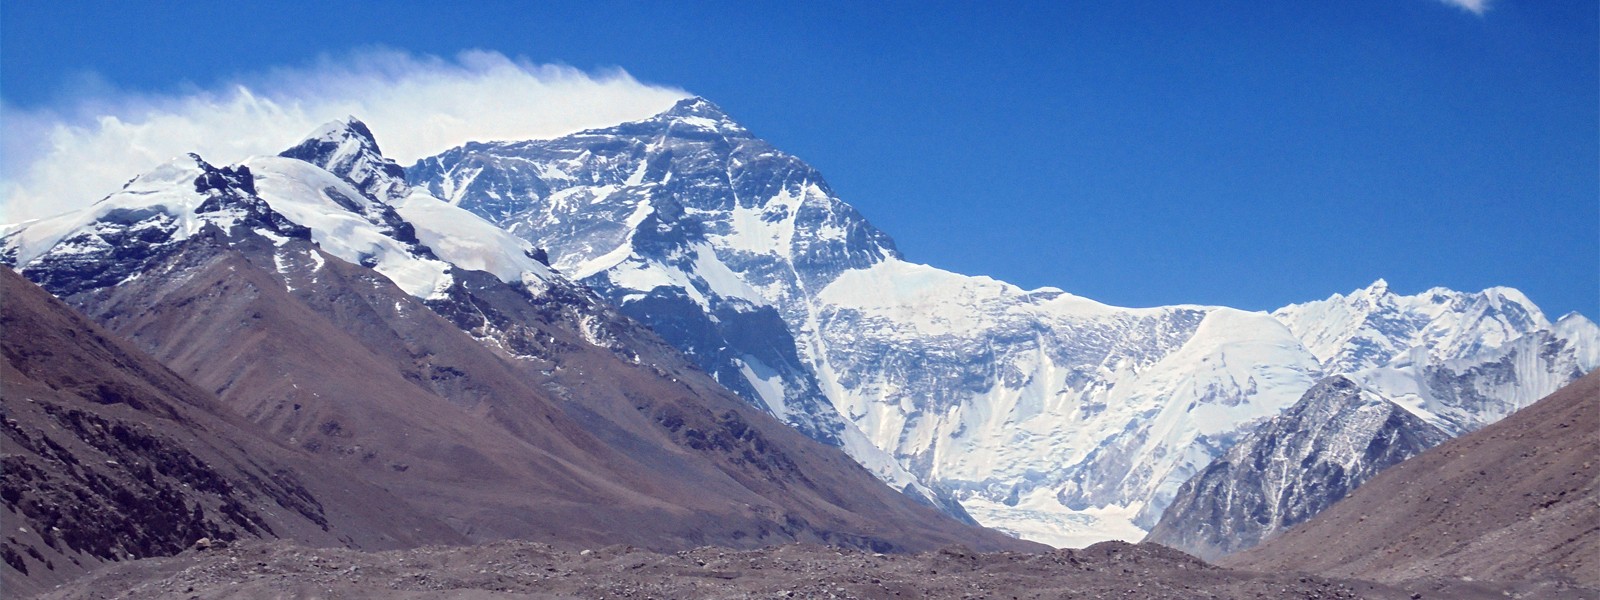 Everest Urgent Care Near Me Emergencies In Nepal On An